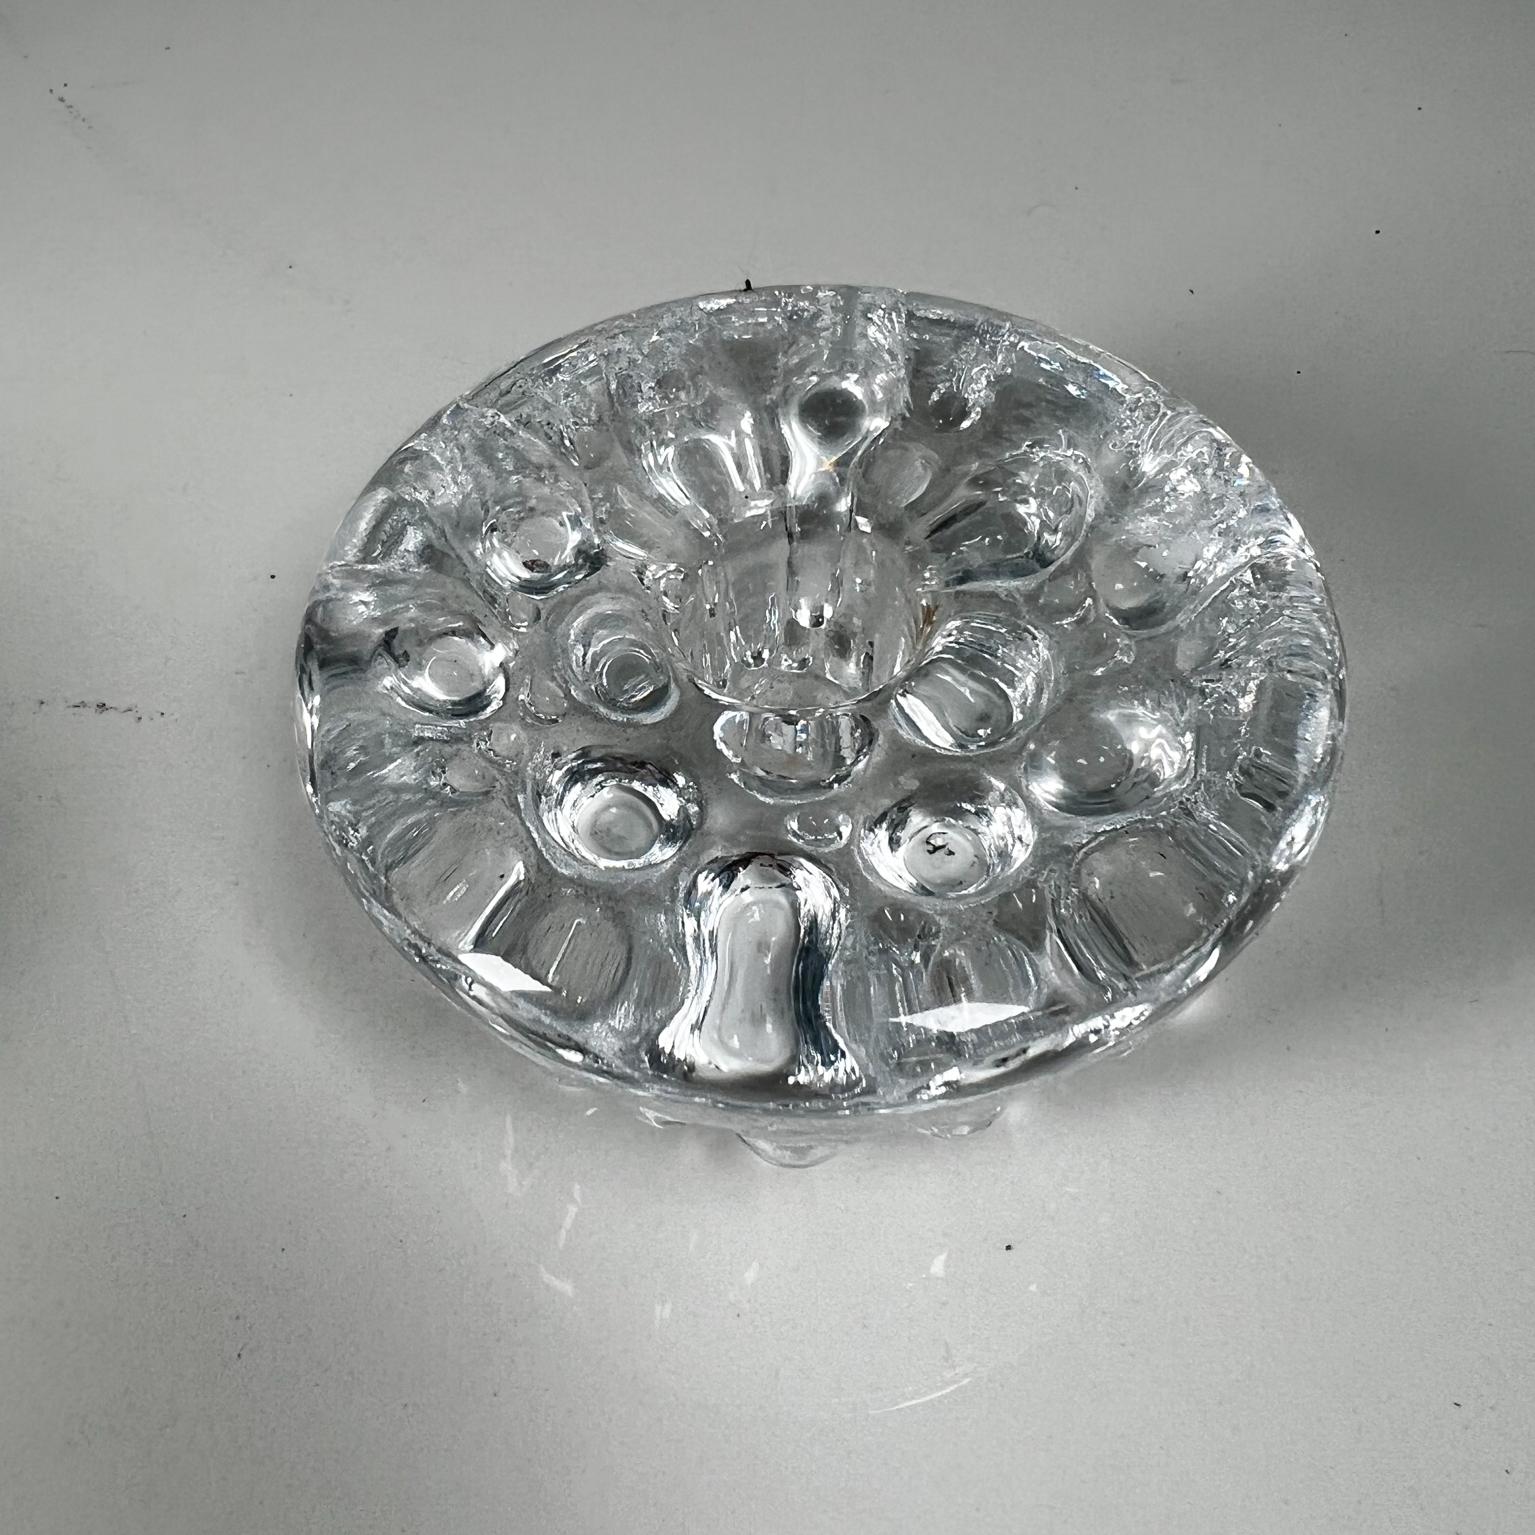 Iittala Tapio Wirkkala Finland Icicle Art Glass Taper Candleholders Pair In Good Condition For Sale In Chula Vista, CA